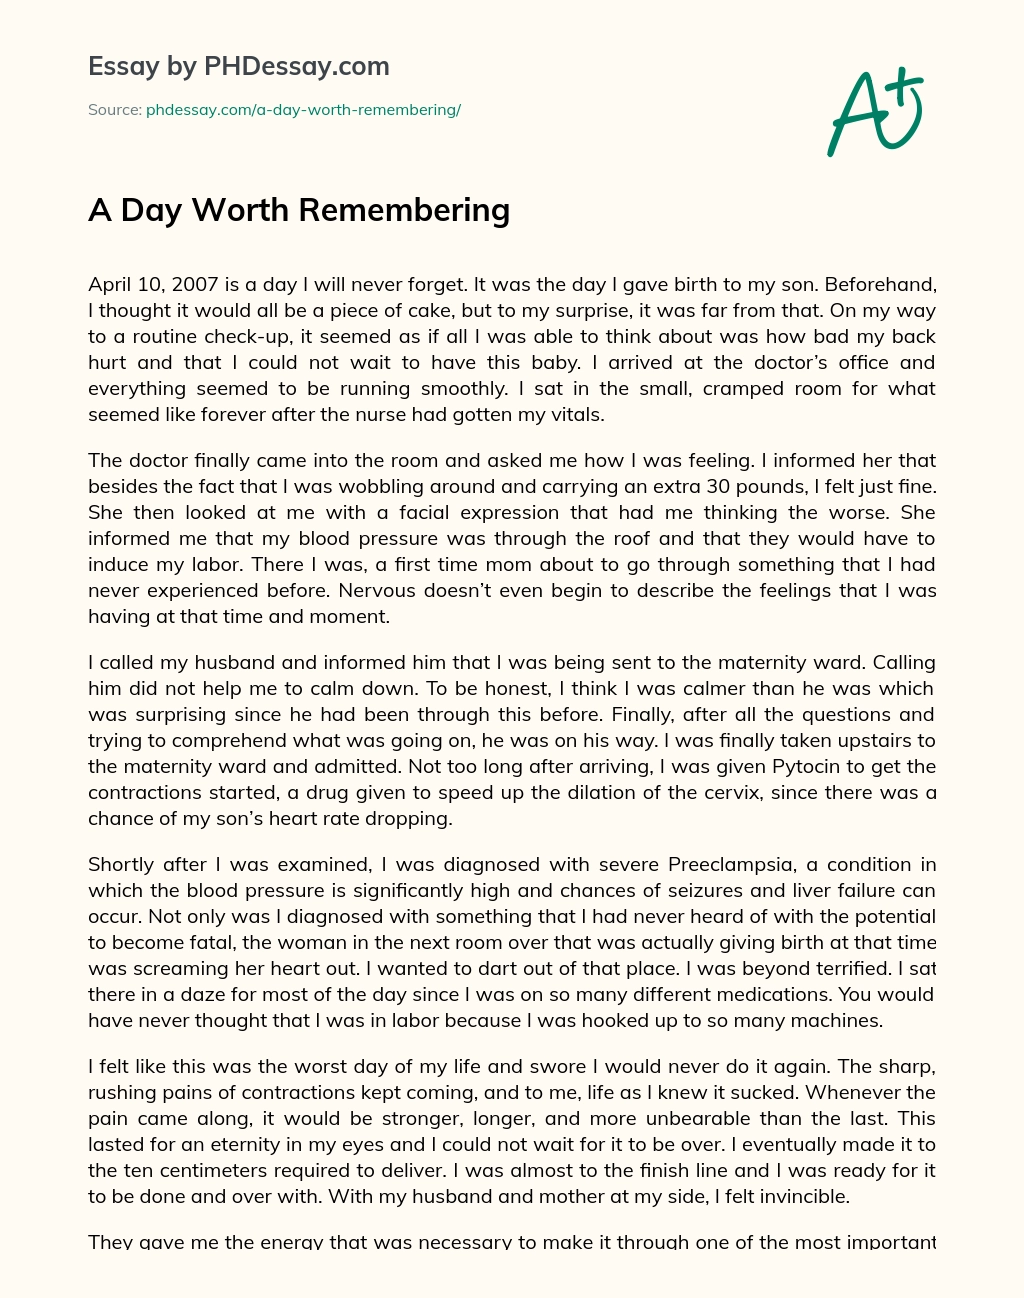 A Day Worth Remembering essay